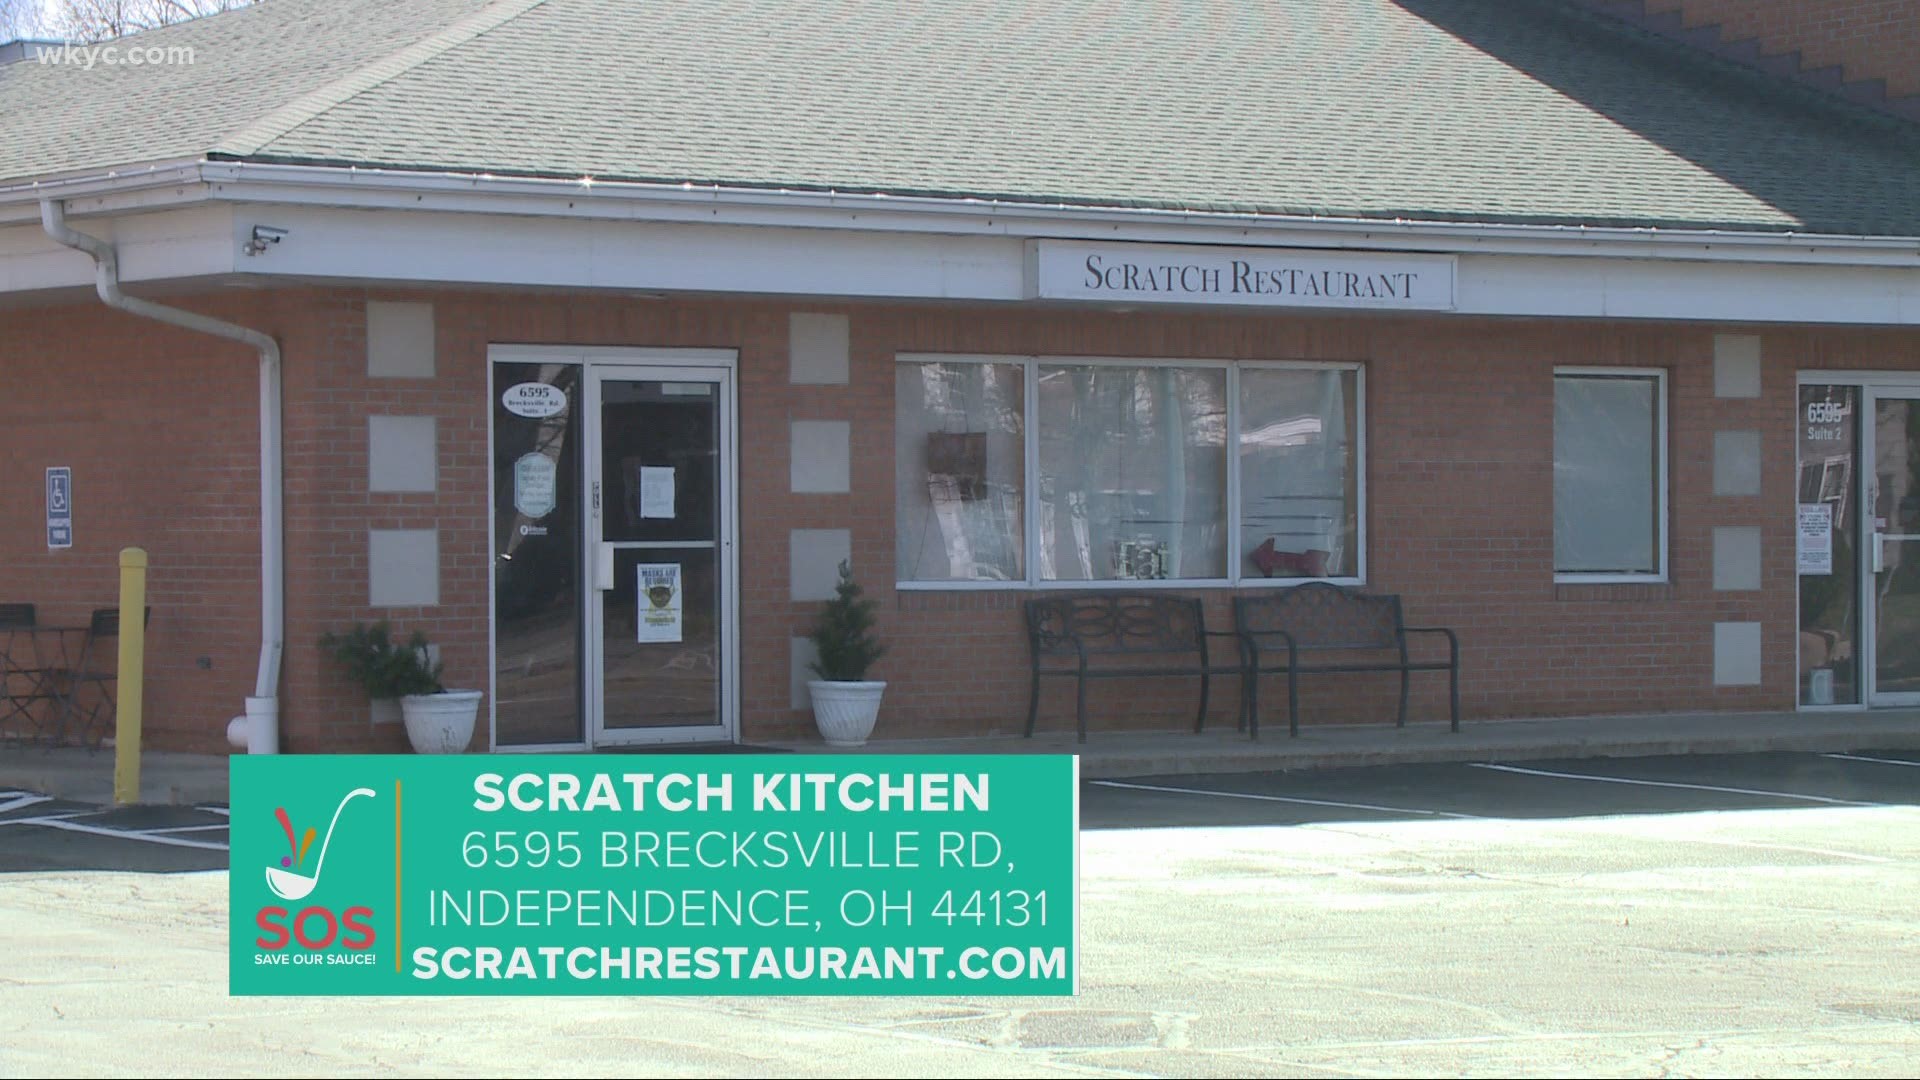 We're highlighting the Scratch Restaurant as the 'Save Our Sauce' campaign continues in support of Northeast Ohio restaurants amid the COVID-19 pandemic.